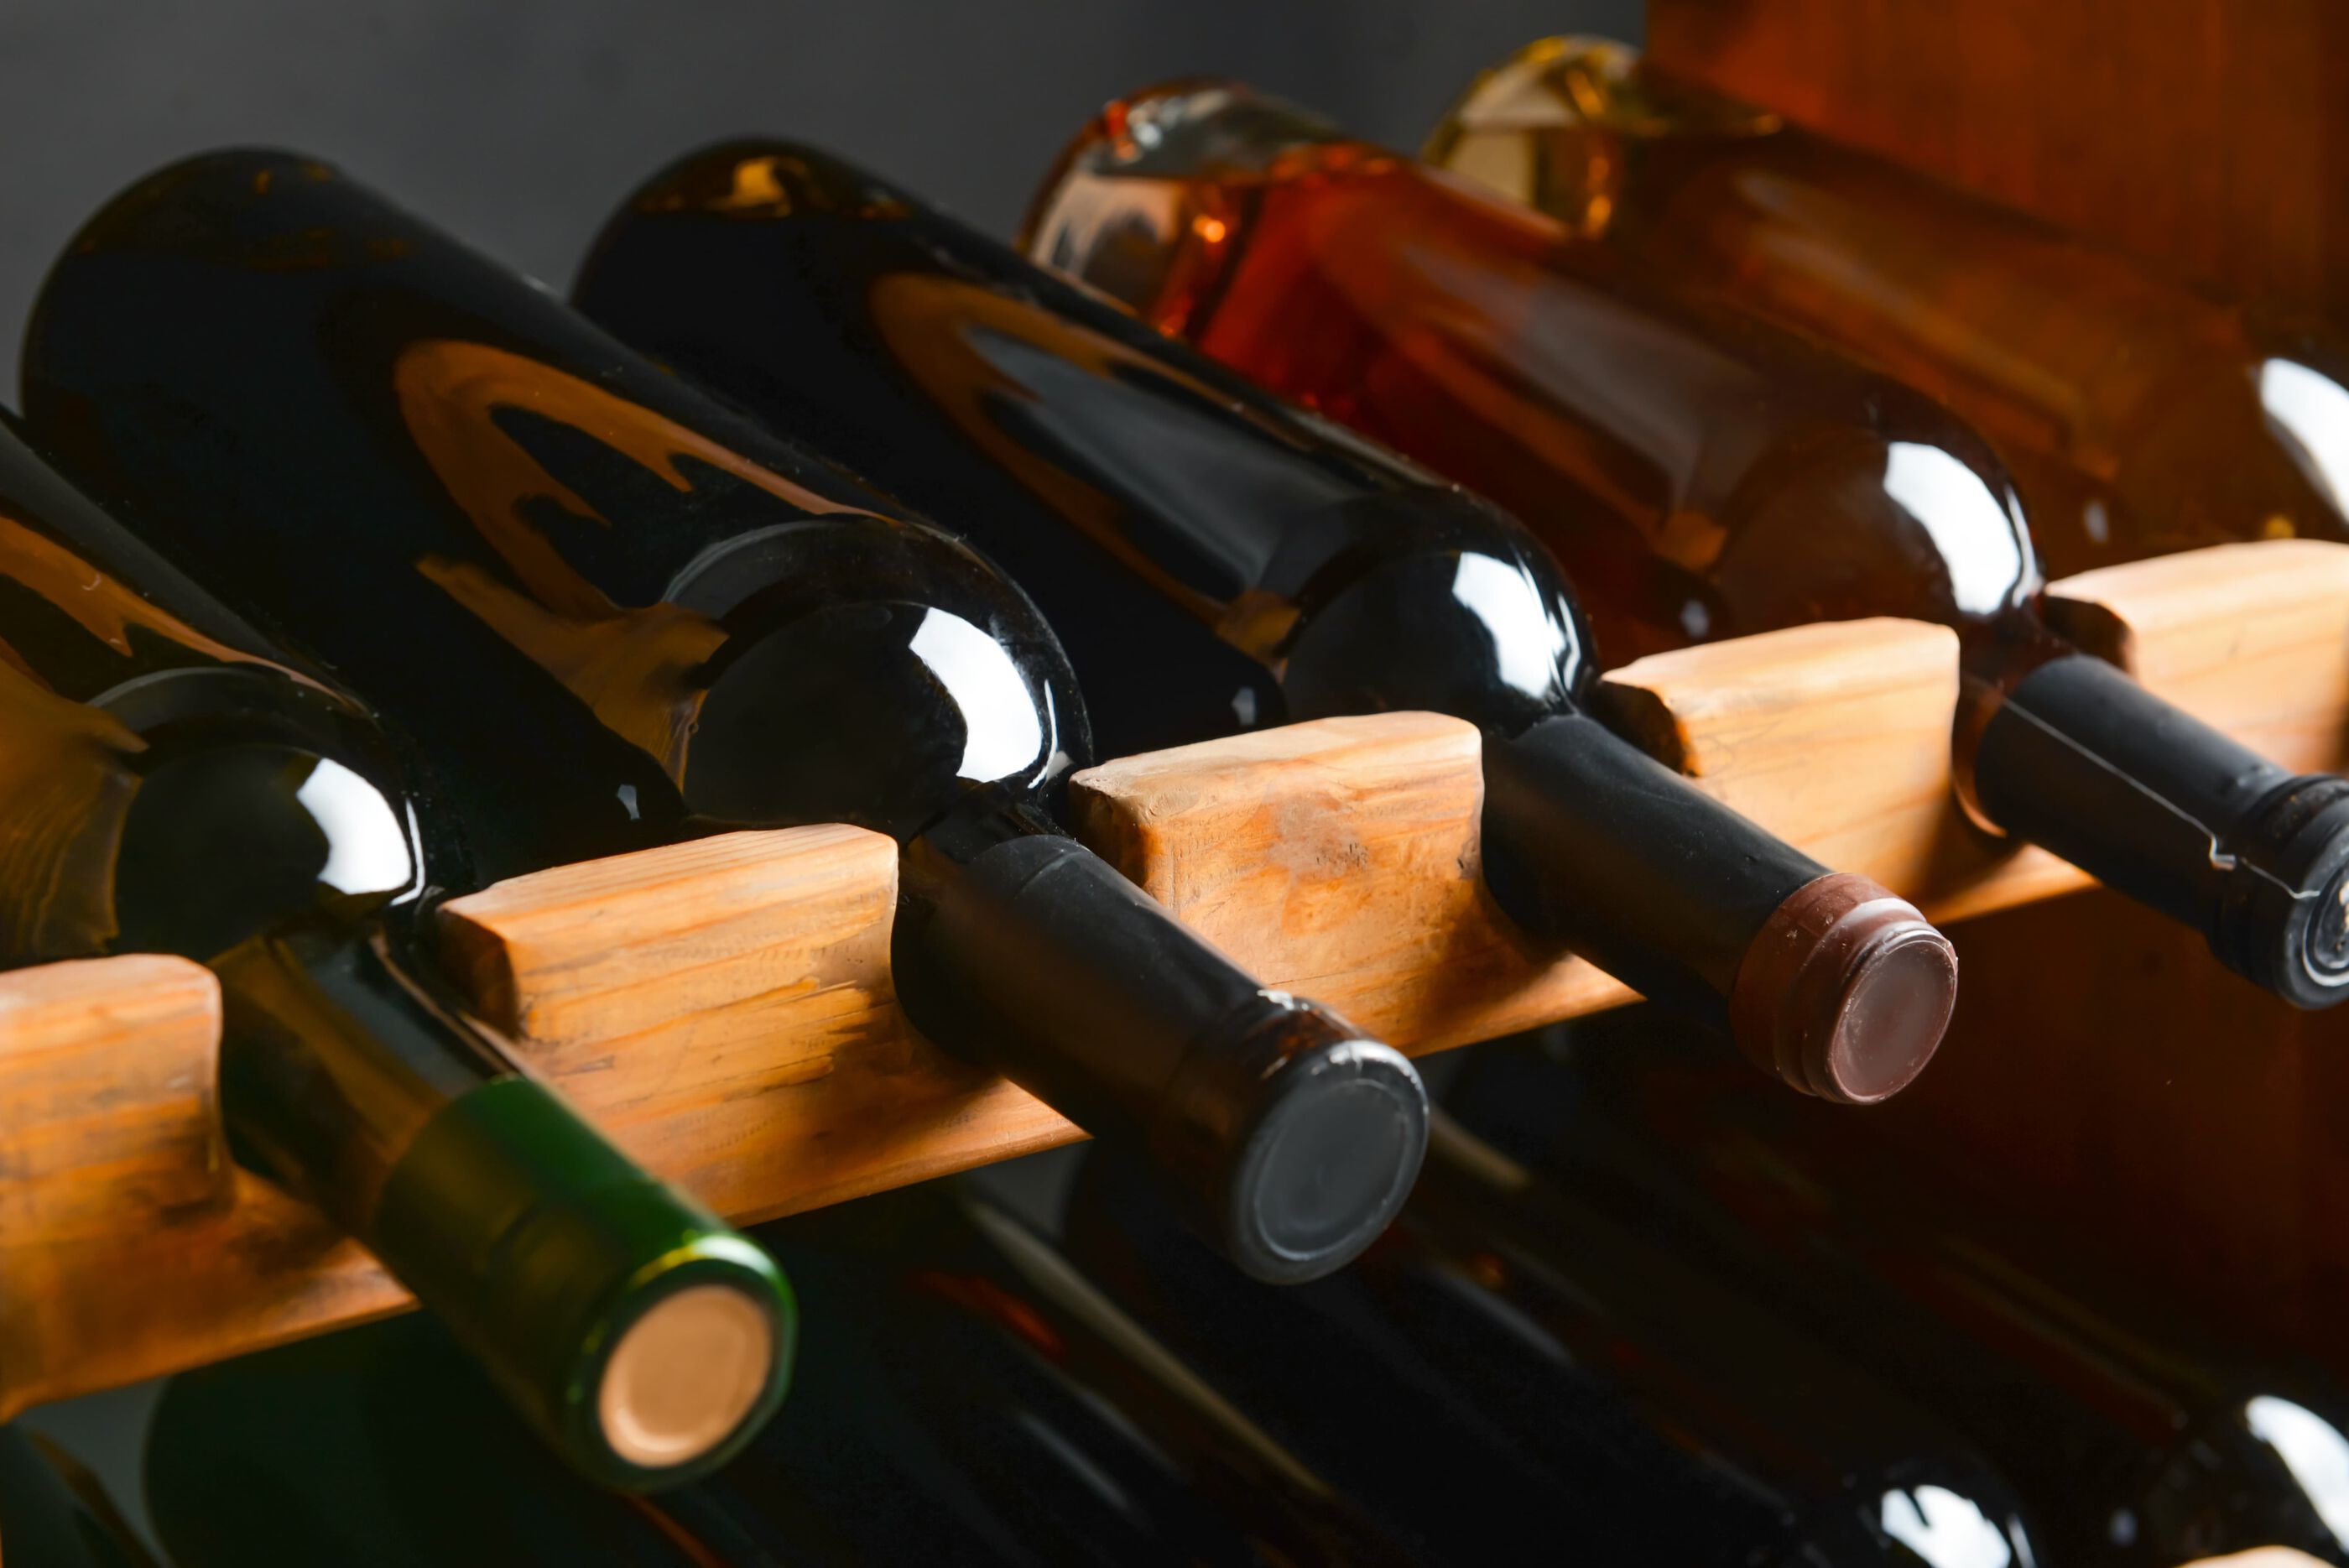 What are the differences between the Global Wine Score and users